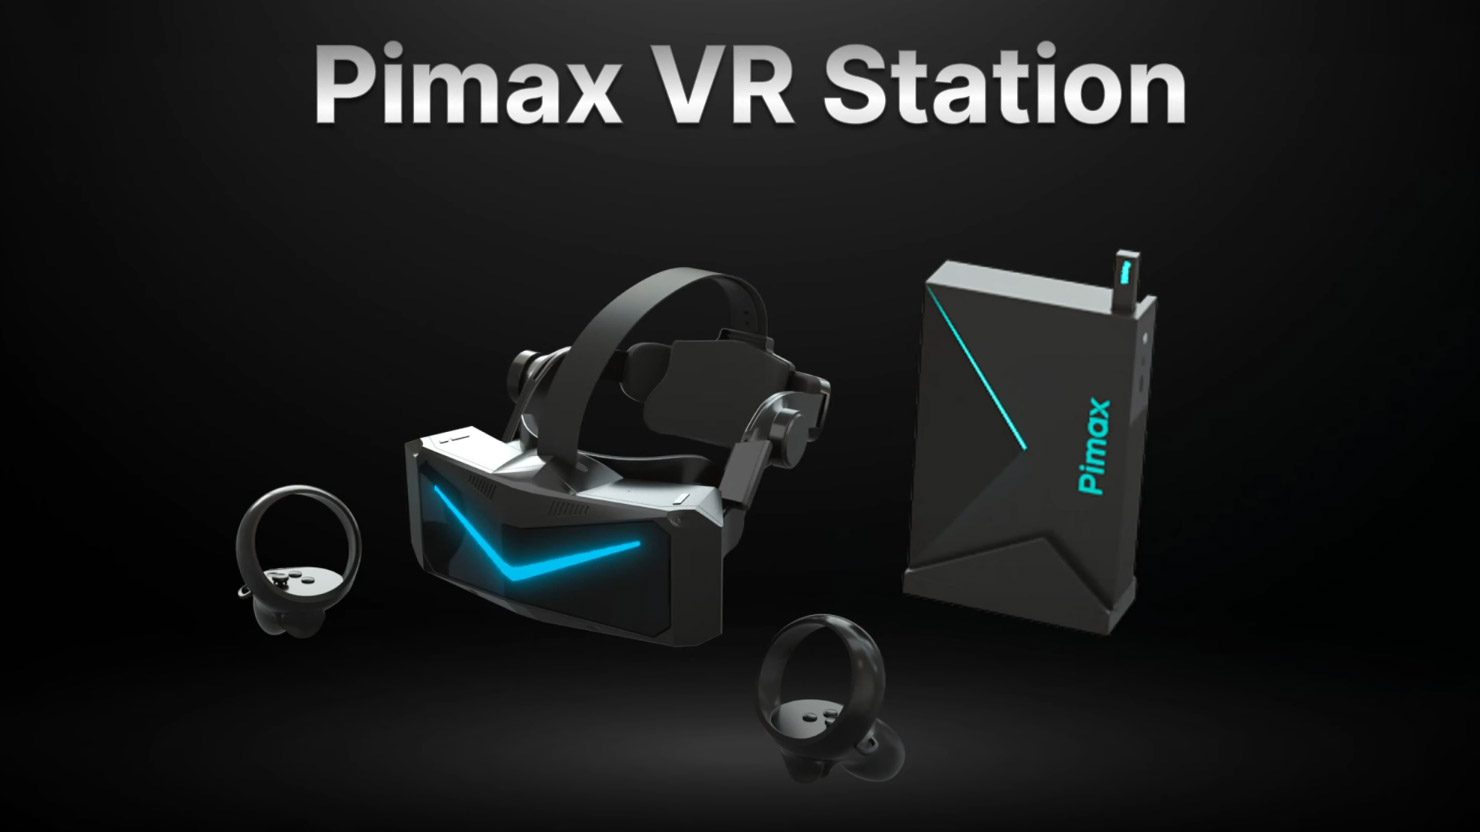 Pimax Has Two New Headsets on the Way While Older Promises Remain Unfulfilled